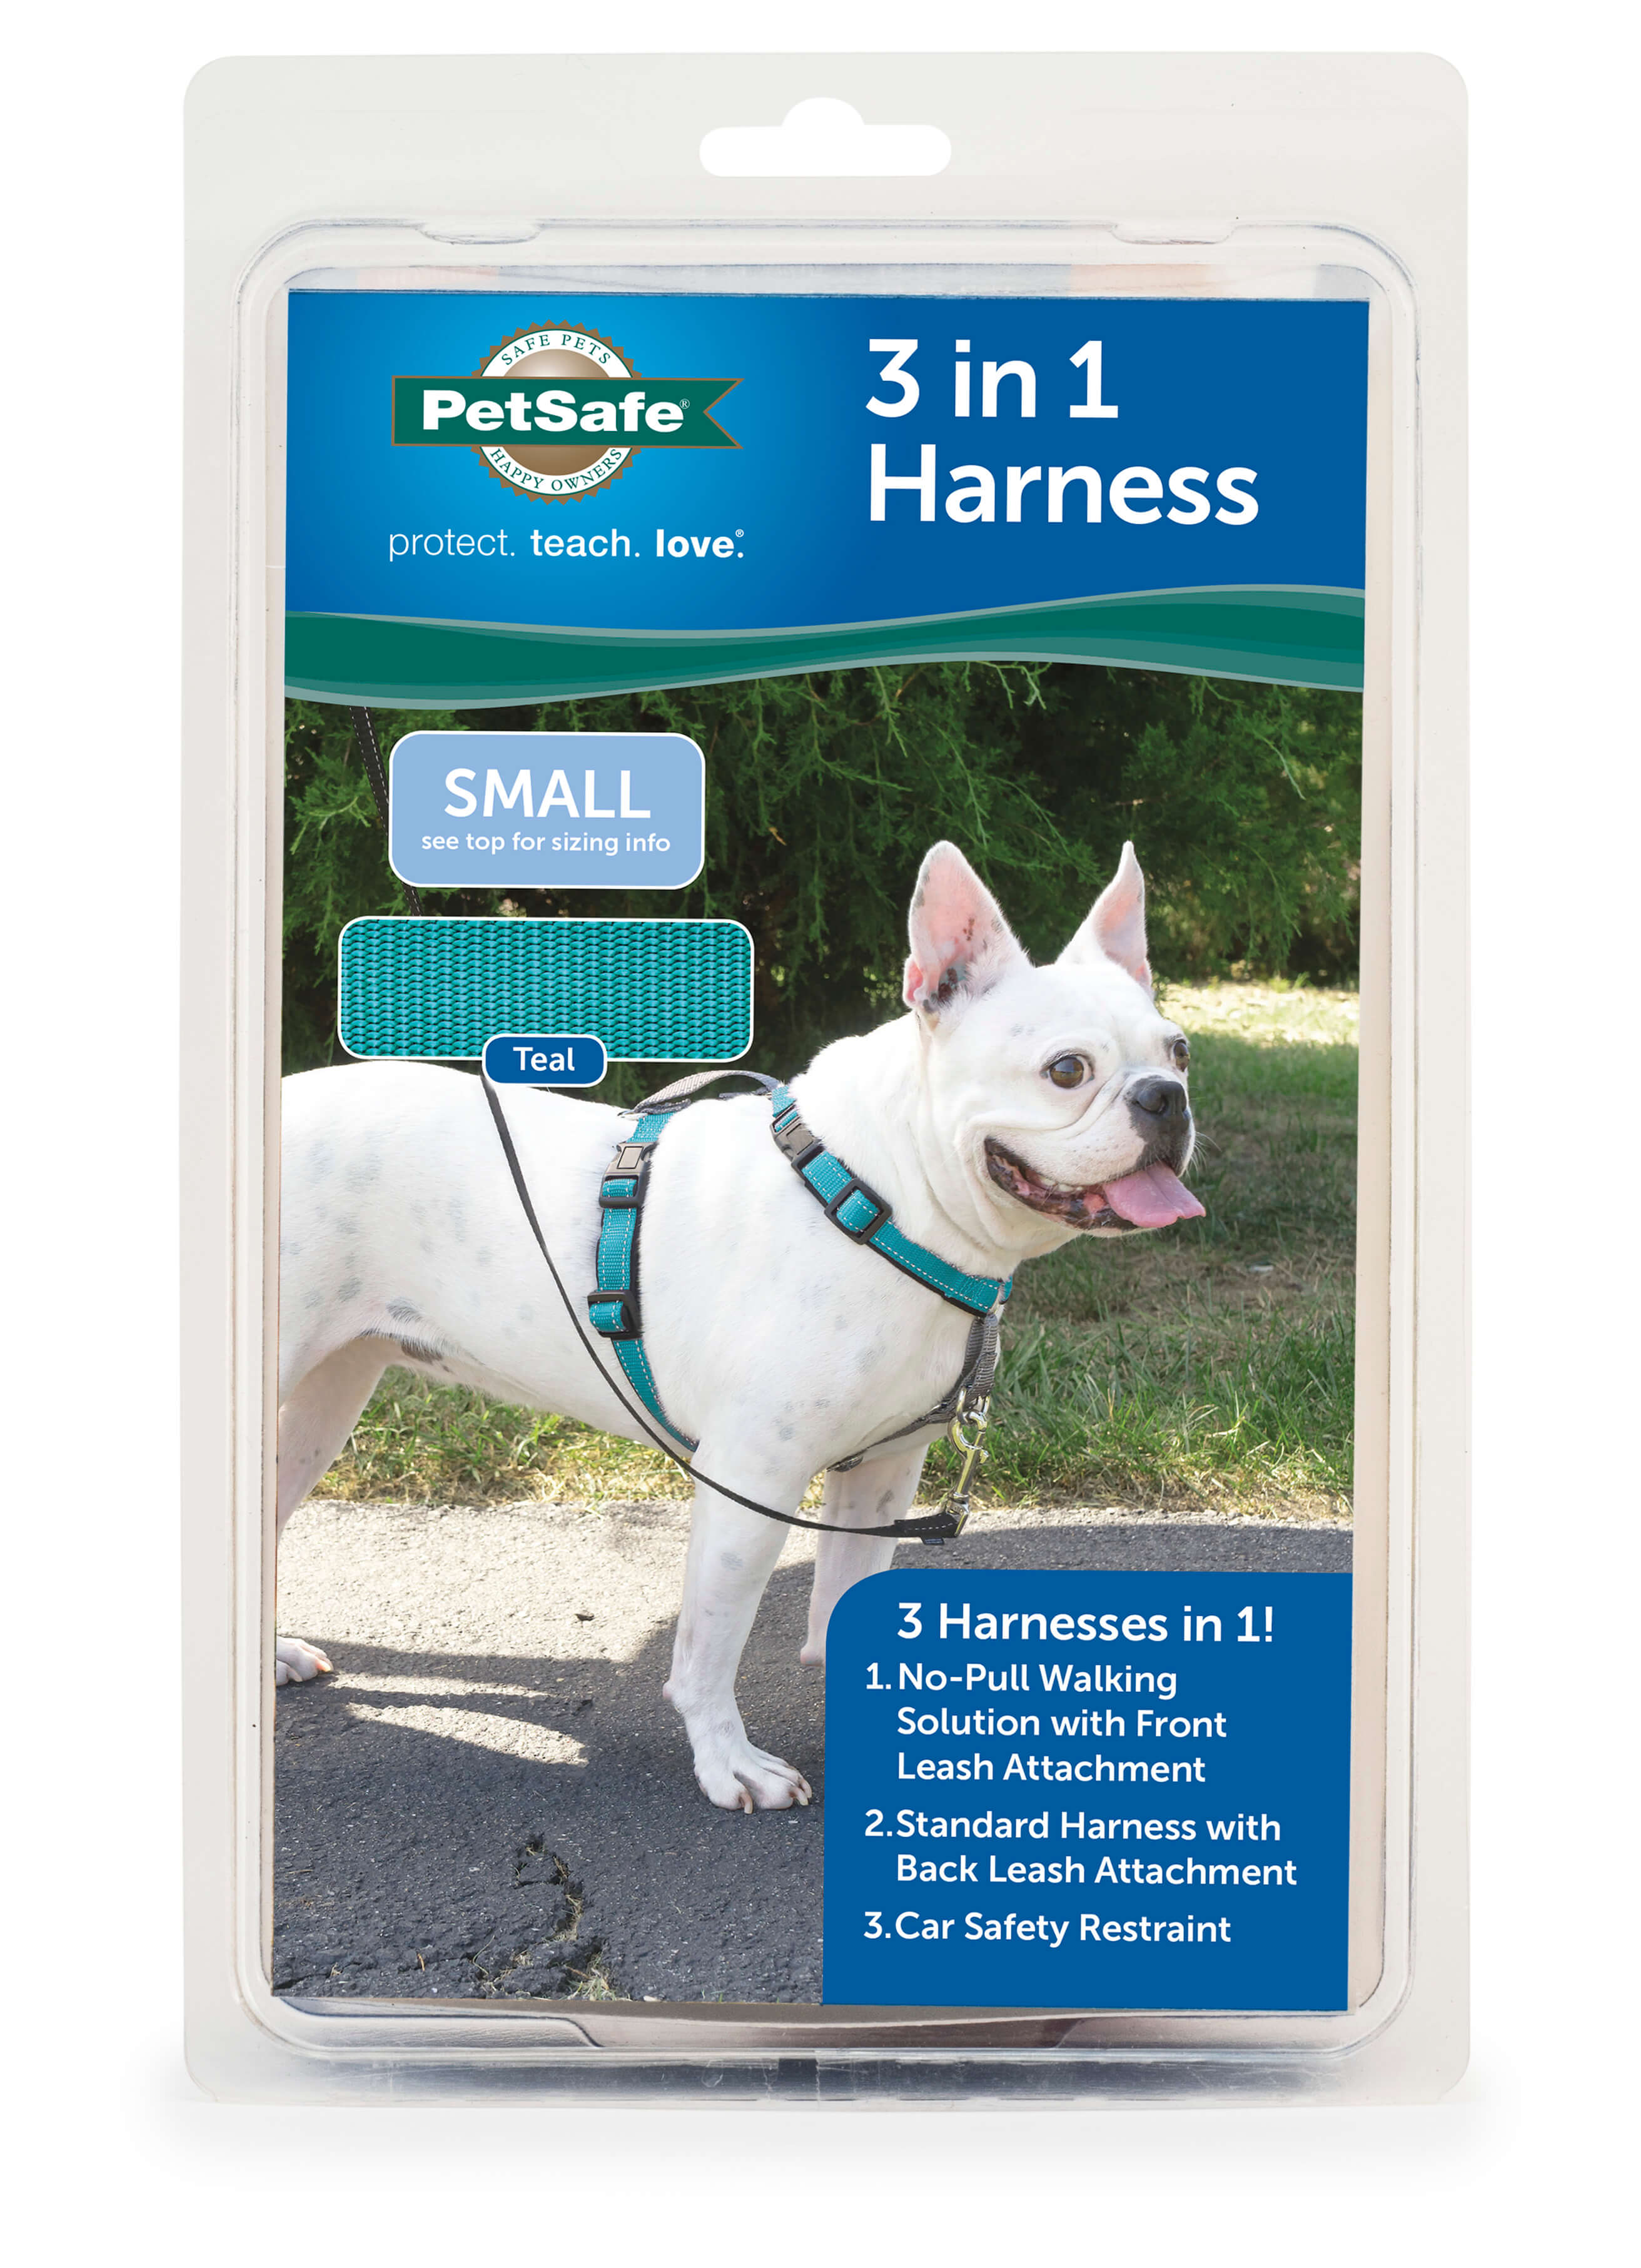 PetSafe 3 in 1 teal dog harness small